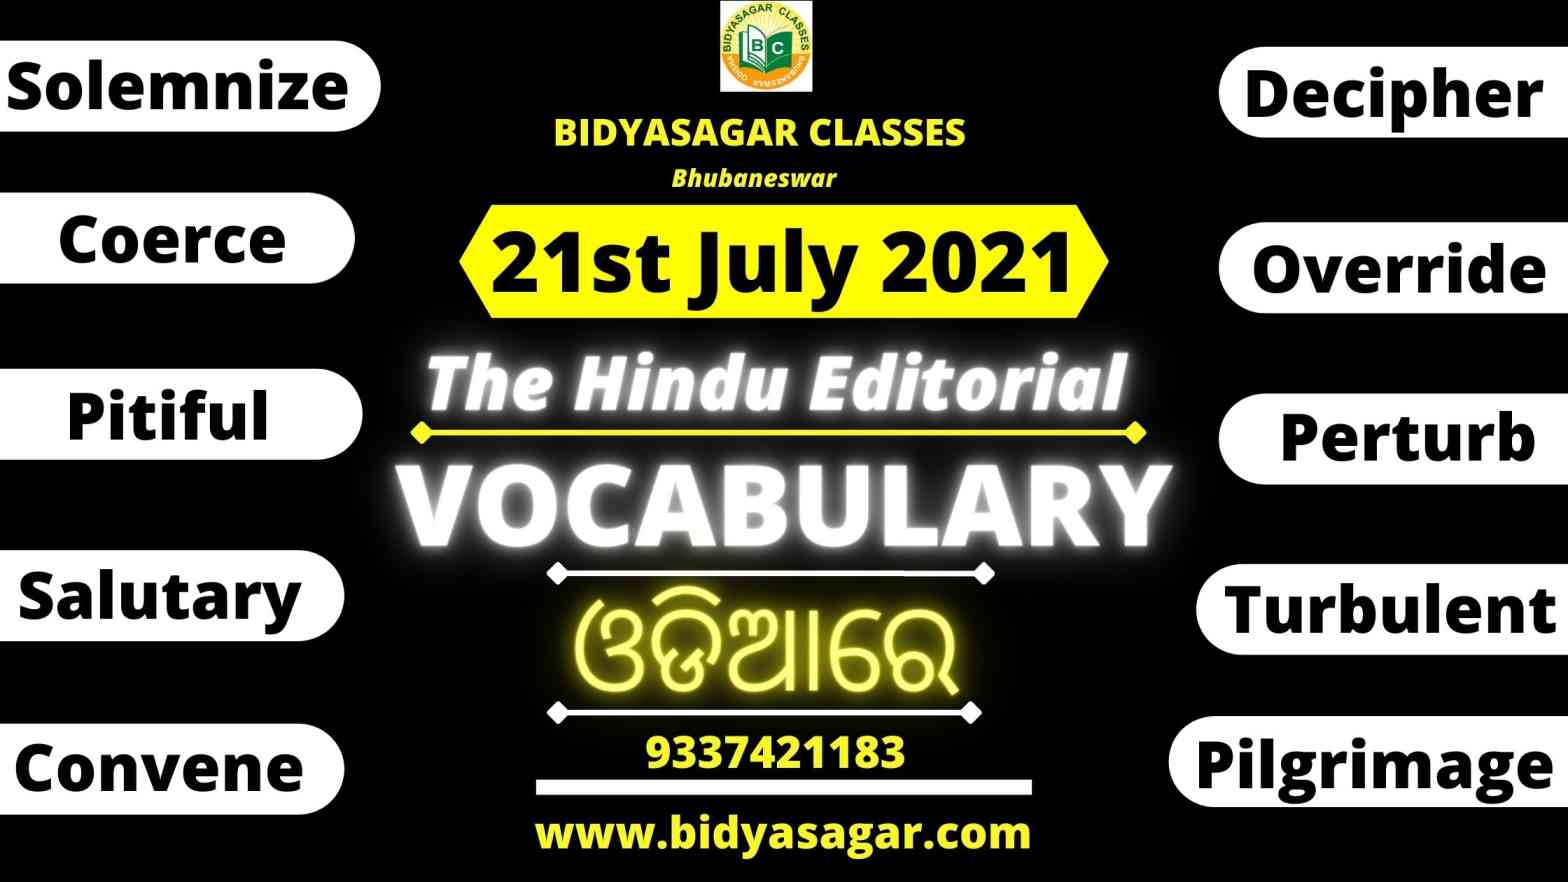 The Hindu Editorial Vocabulary of 21st July 2021